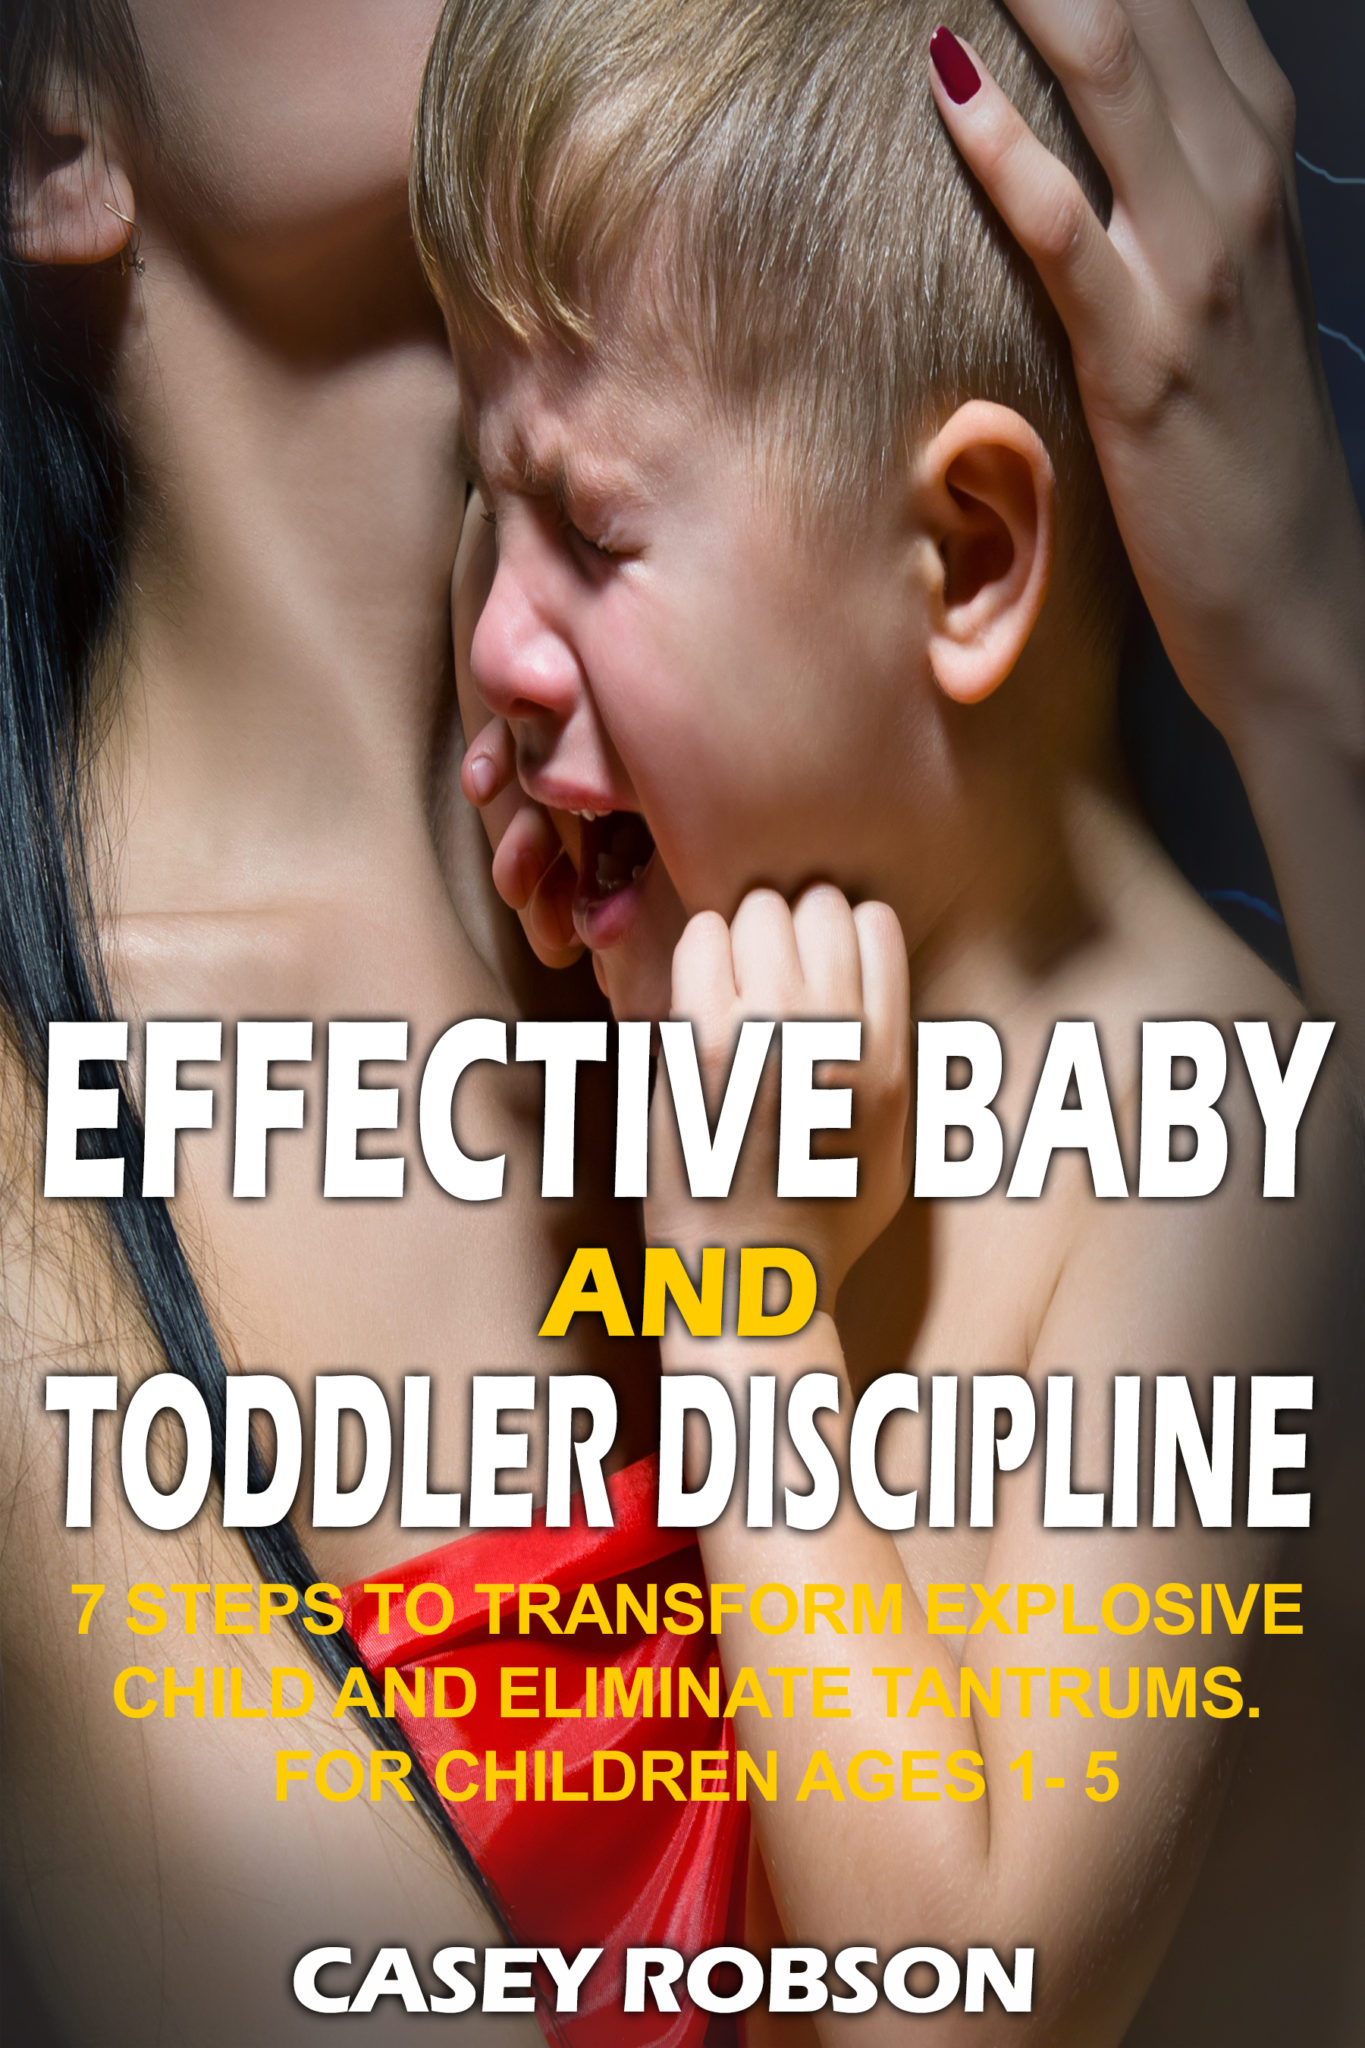 FREE: Effective Baby and Toddler Discipline: 7 Steps to Transform Explosive Child and Eliminate Tantrums. For Children Ages 1- 5 by Casey Robson